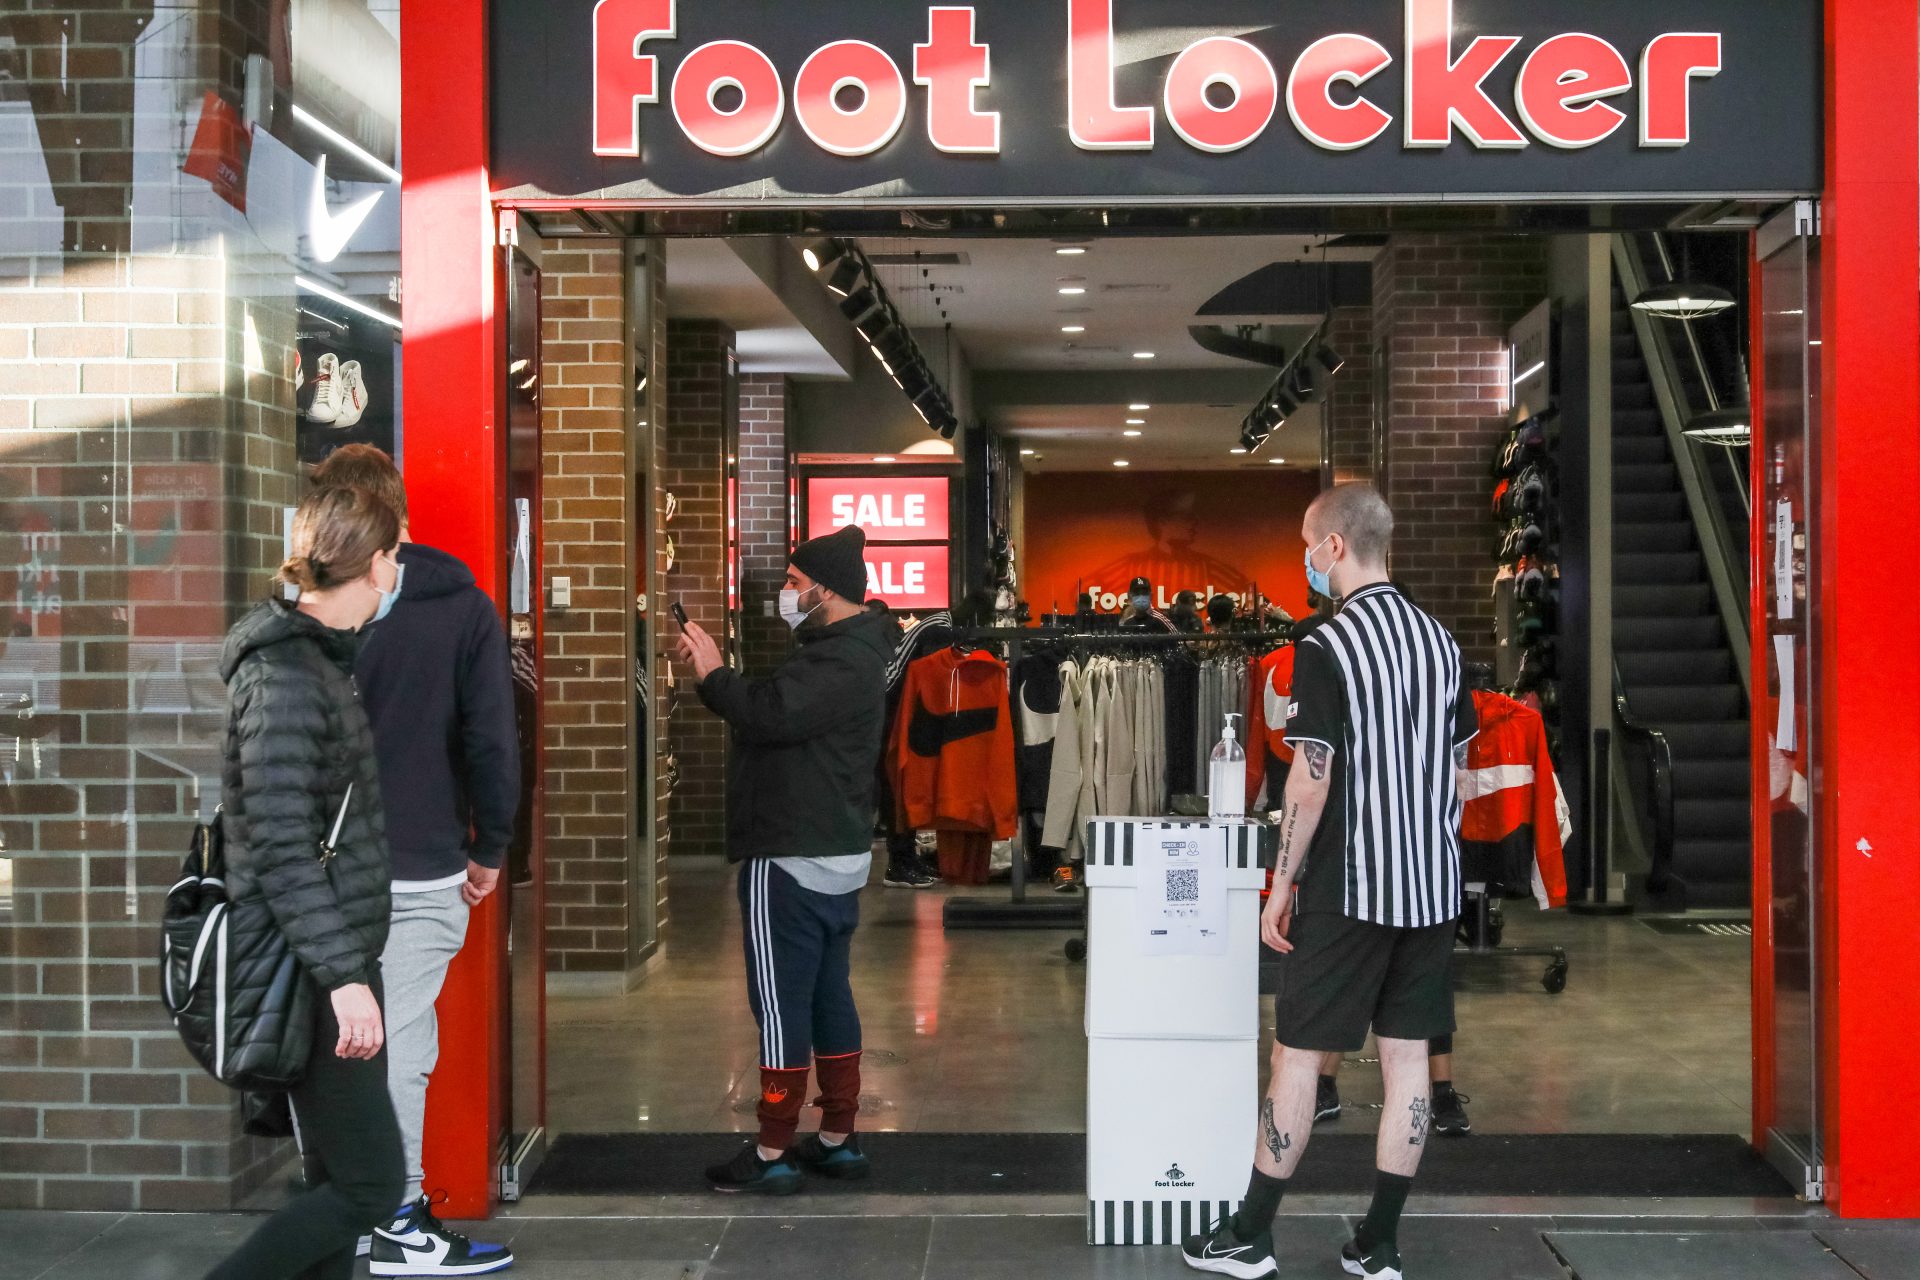 Nike Reduces Amount Of Products Sold In Foot Locker Stores